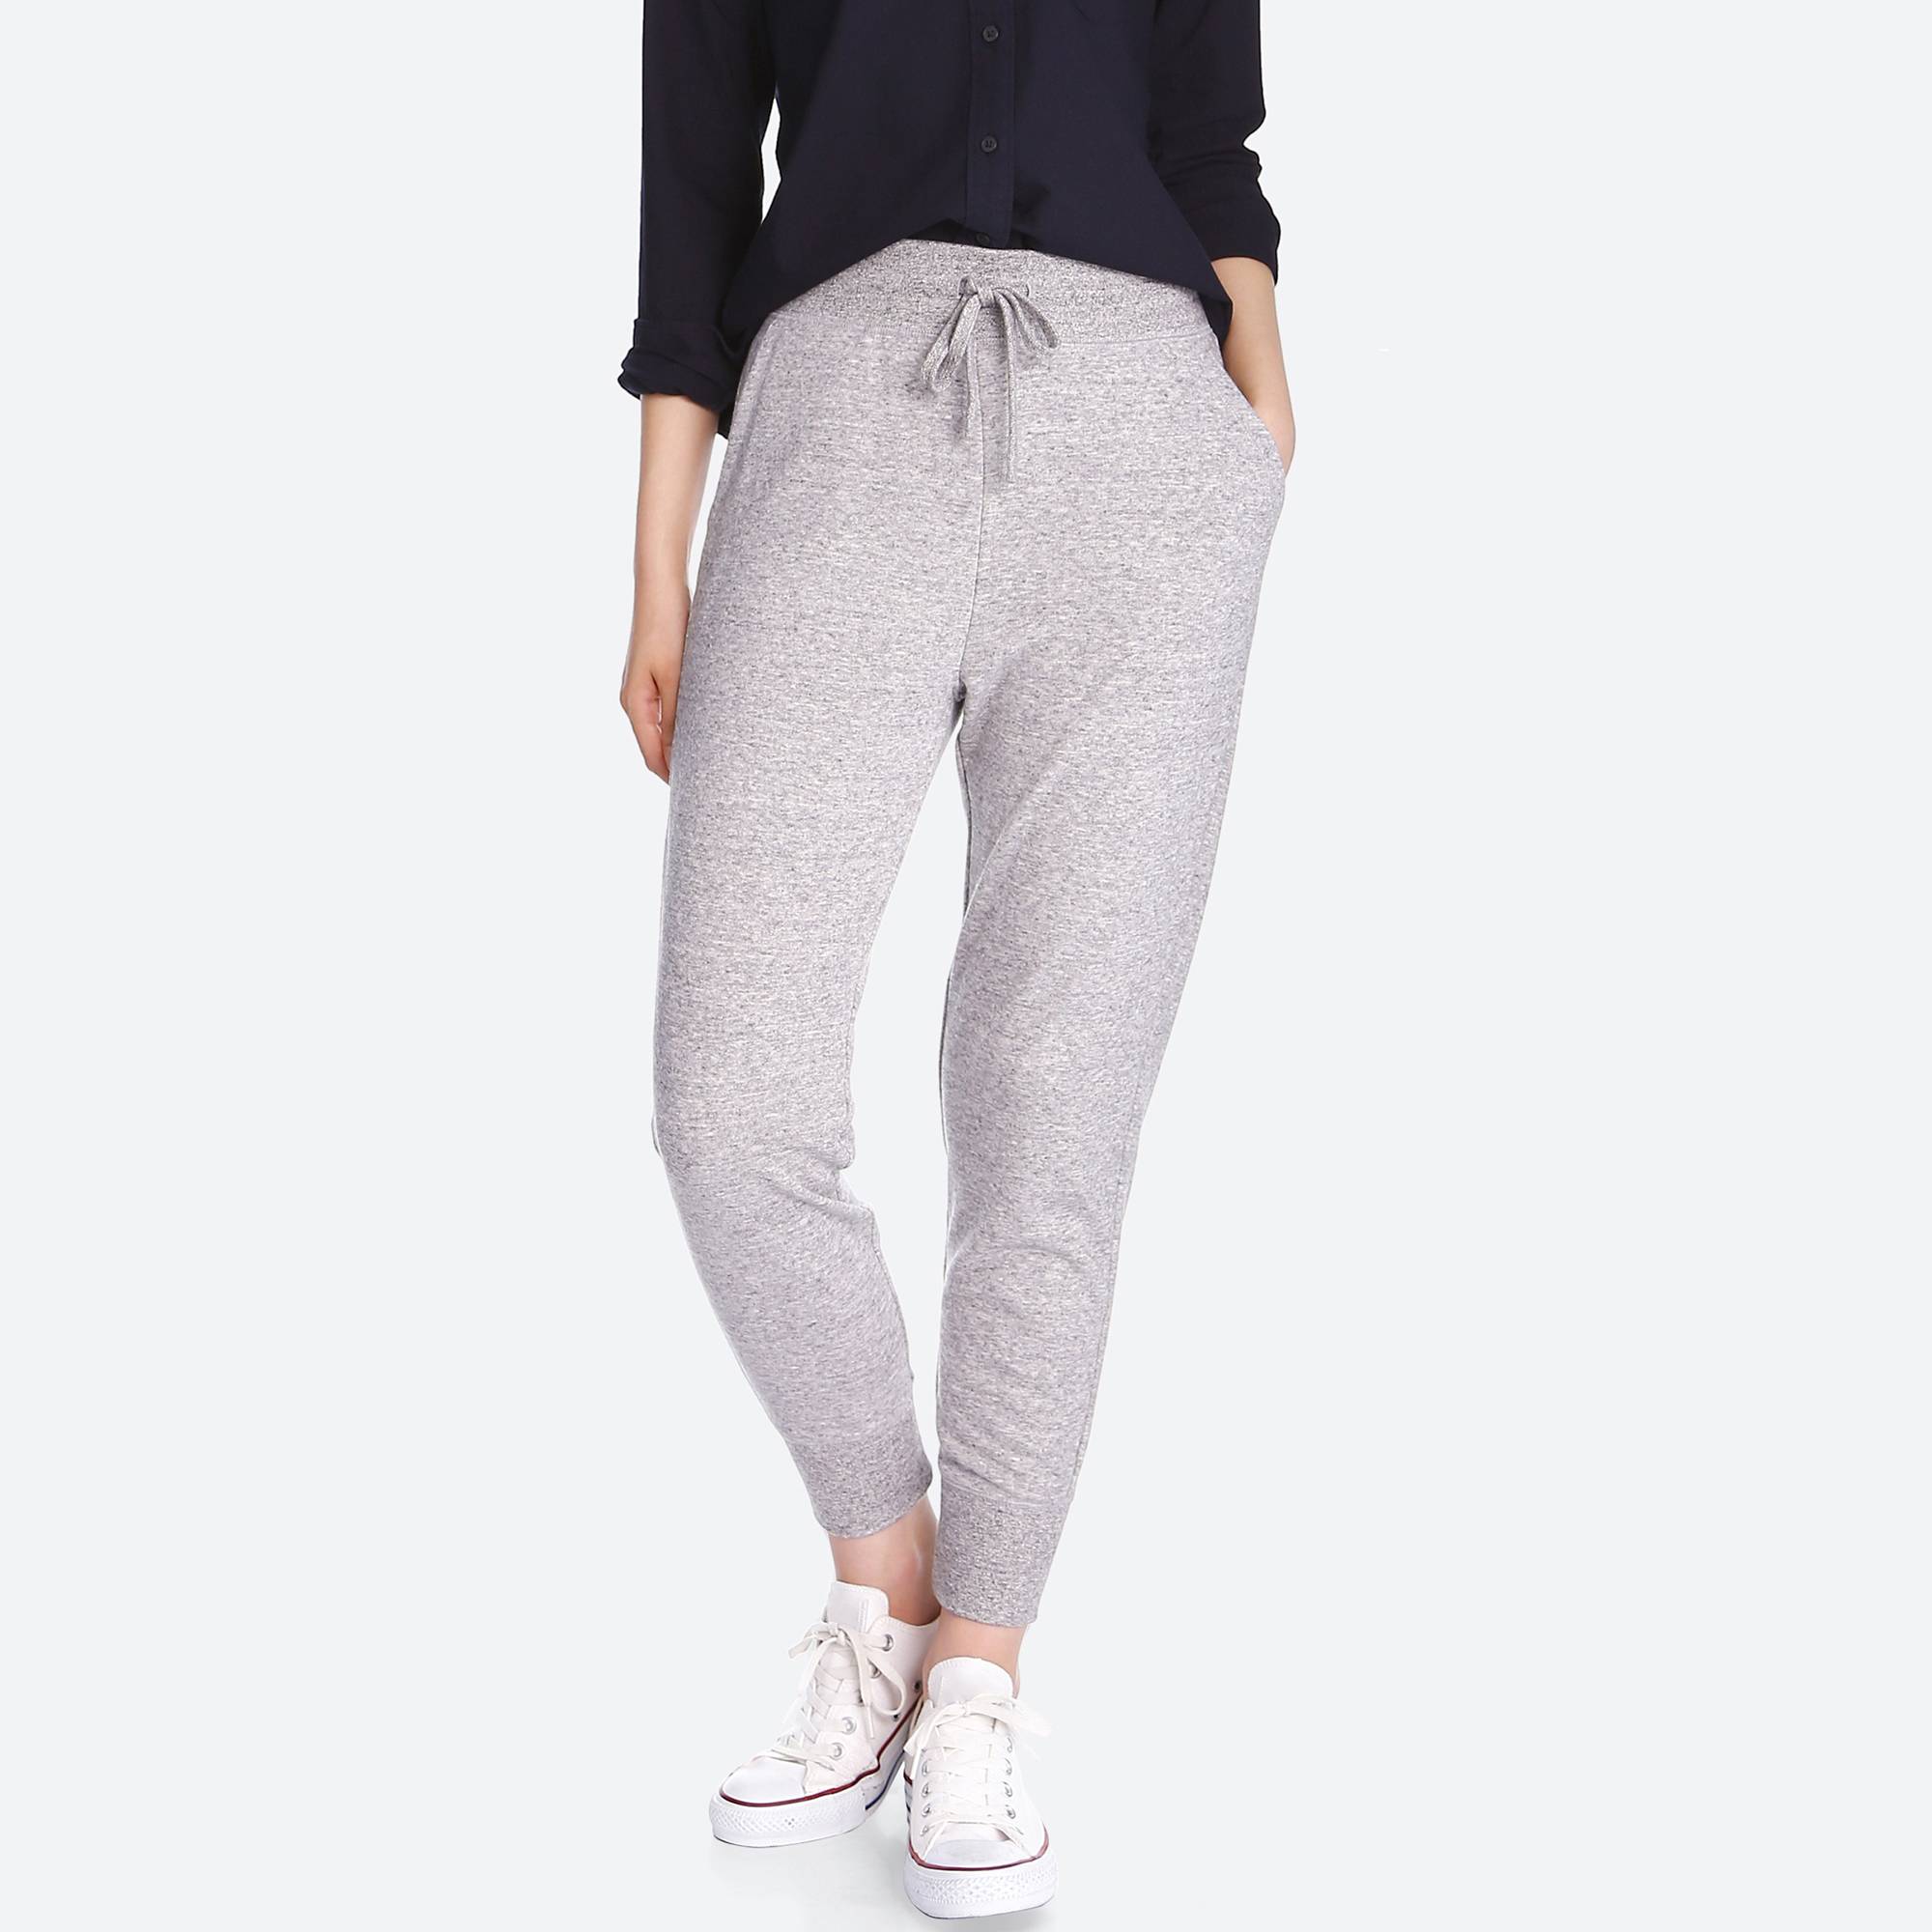 District types of womens sweatpants
to  consider